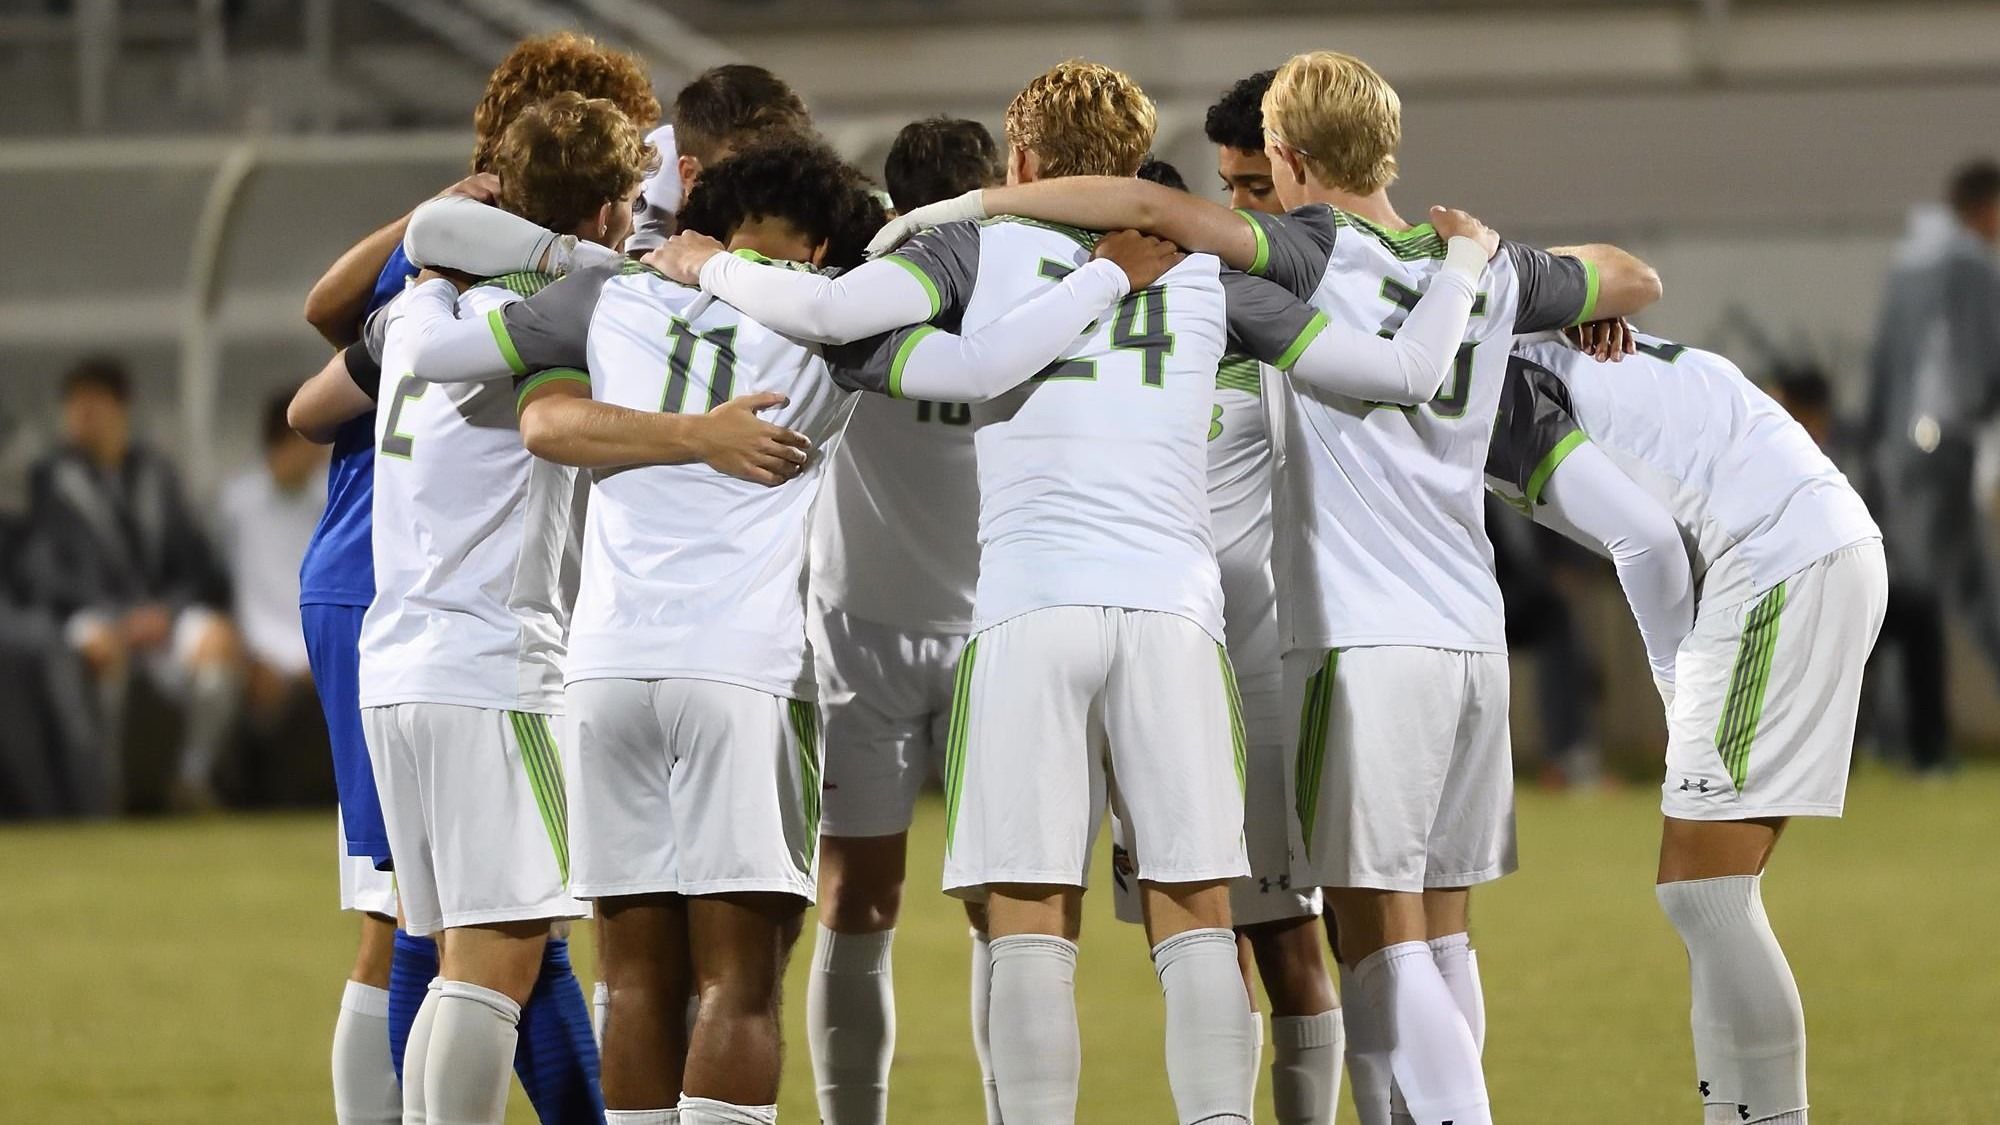 UAB Men's Soccer is Ready to Start Anew